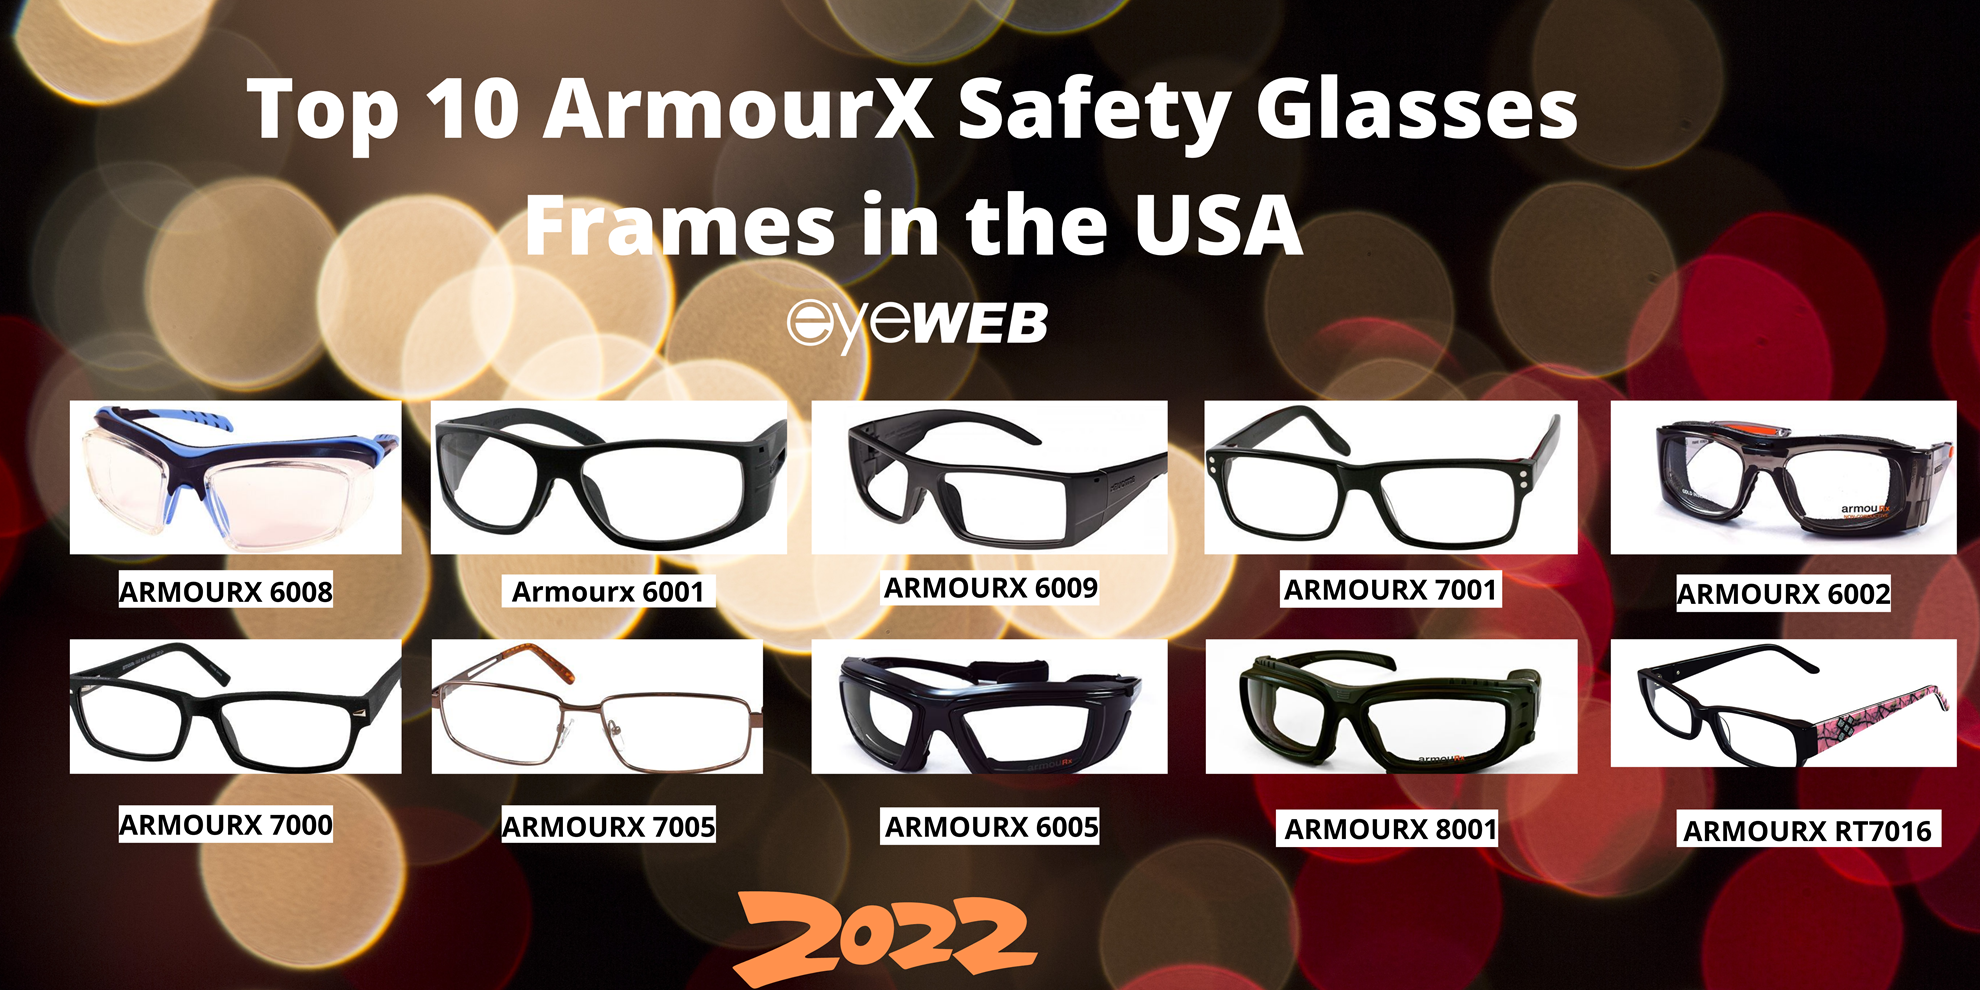 Top 10 ArmourX Safety Glasses Frames in the USA